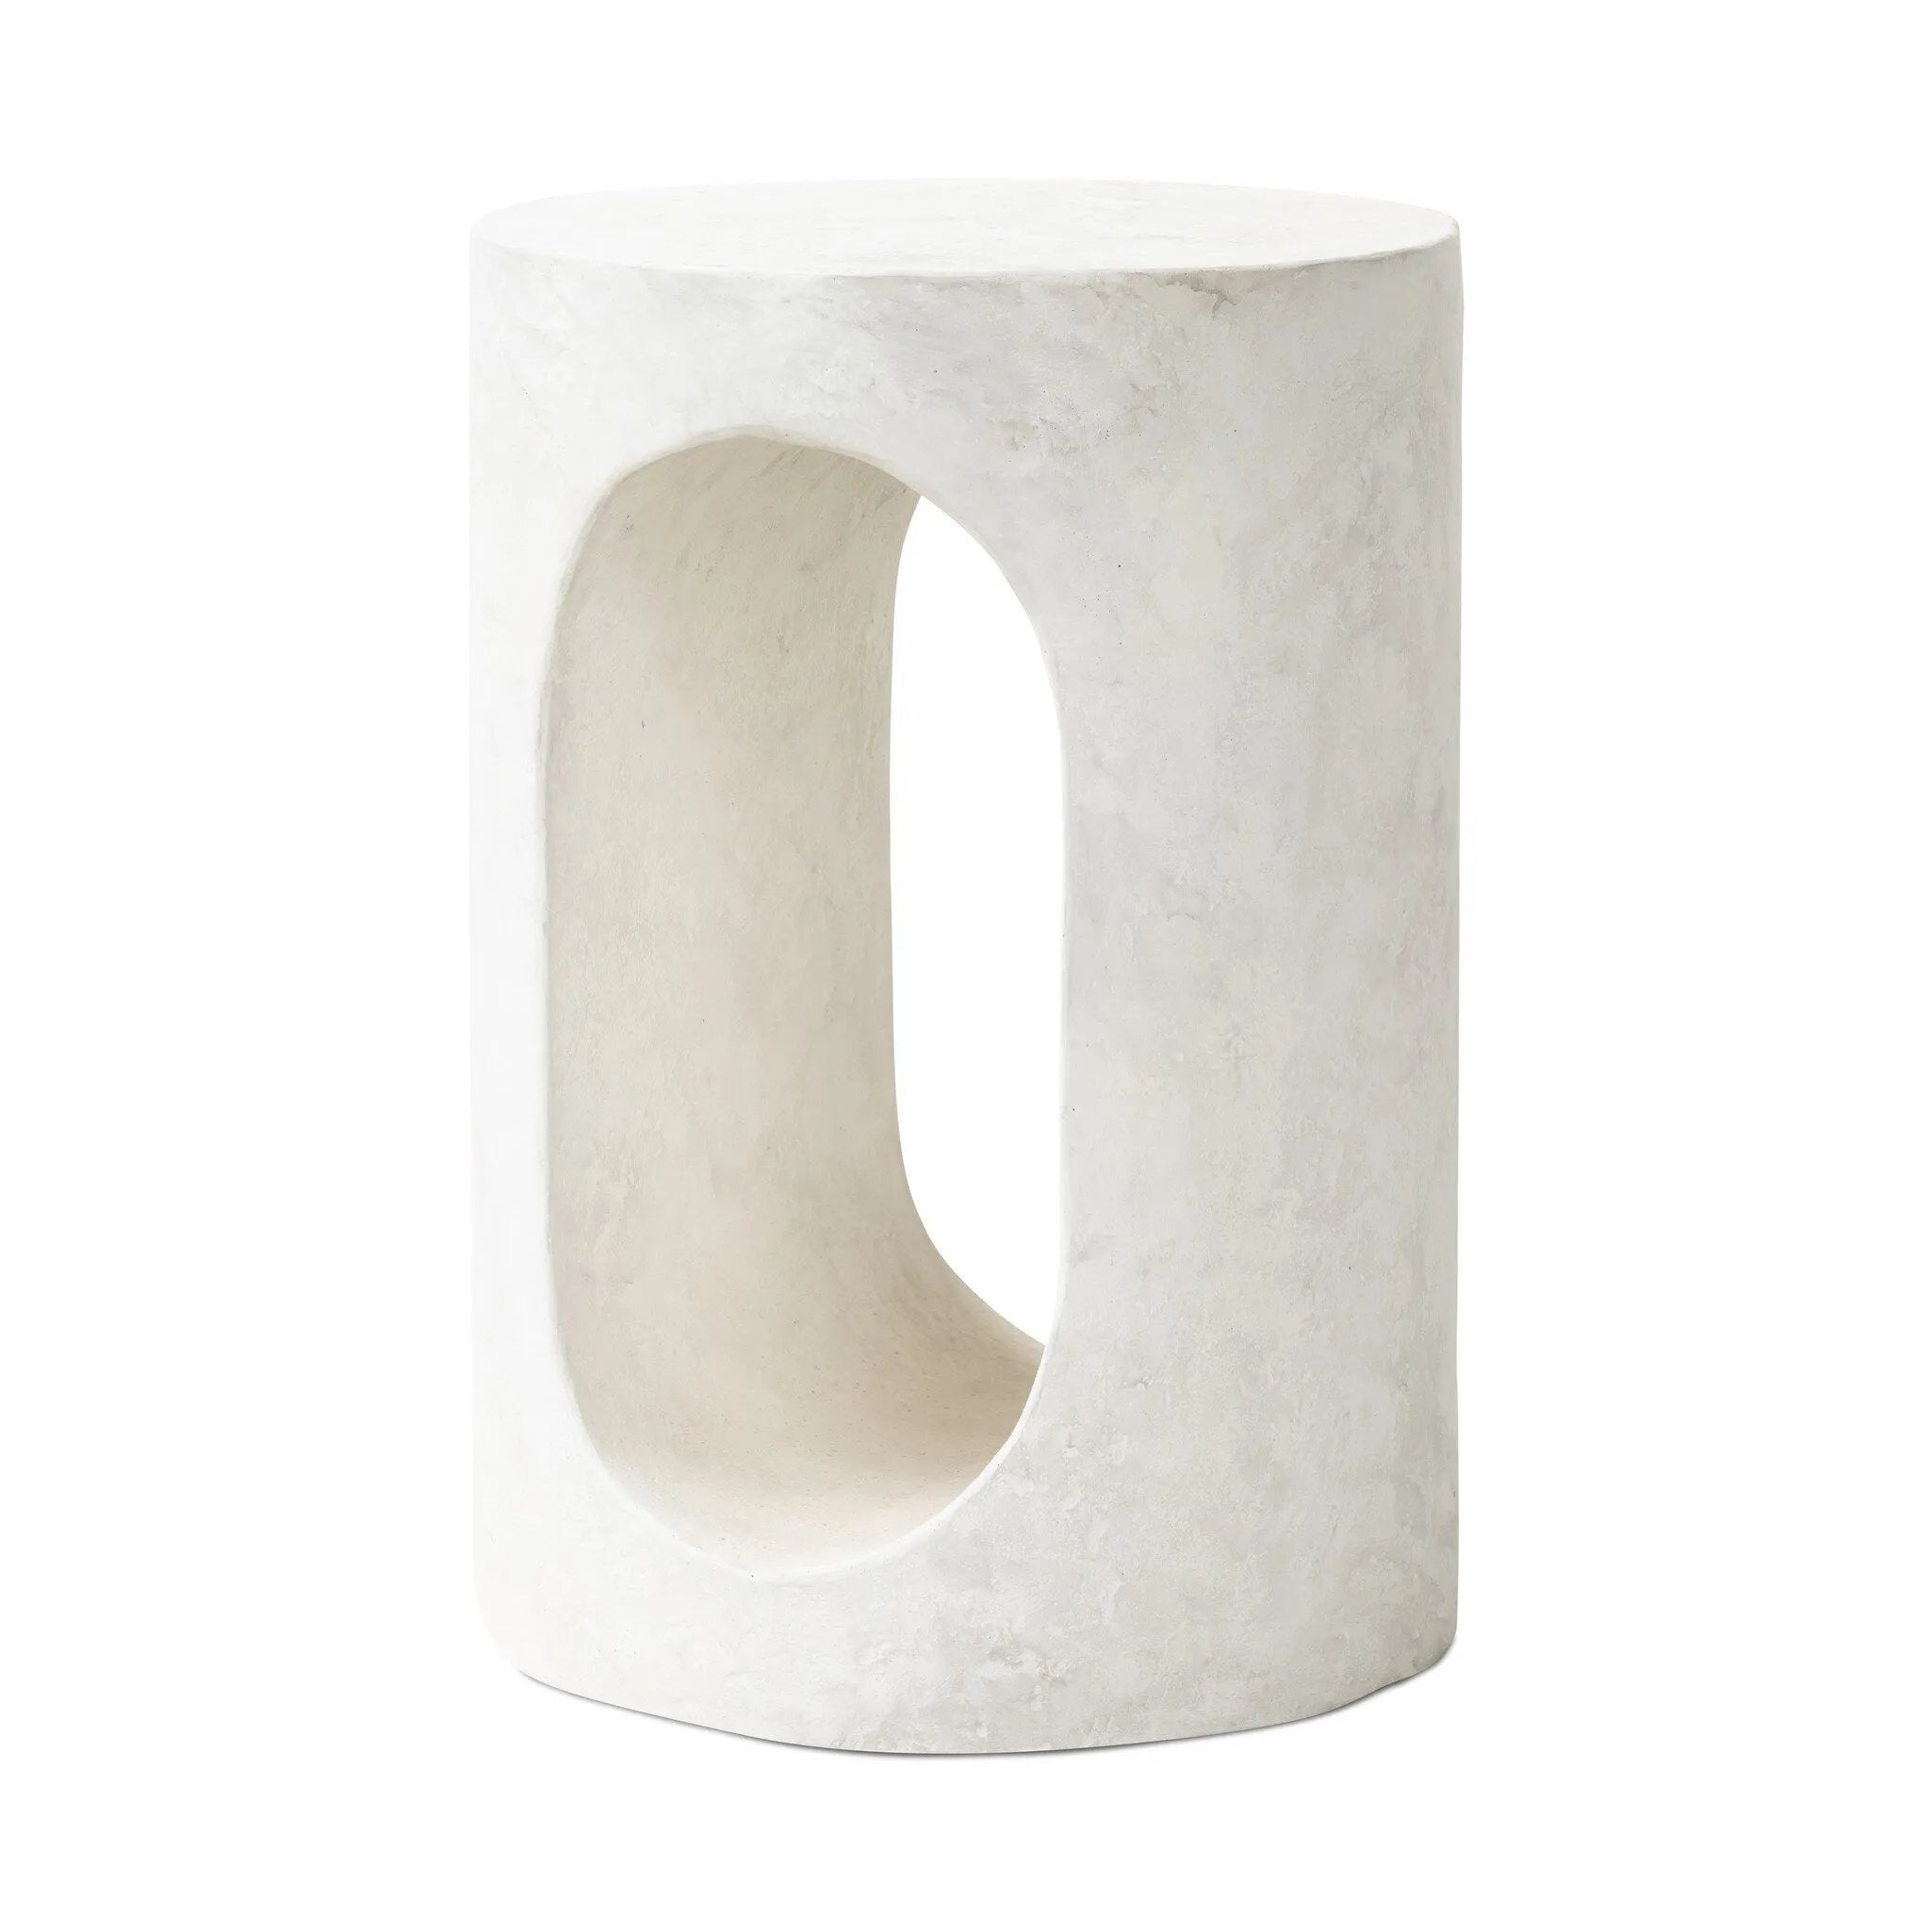 Made from textured white concrete, a cylinder shaped end table features a pill-shaped cutout for a light look. Subtle mottling adds a hint of texture.Collection: Chandle Amethyst Home provides interior design, new home construction design consulting, vintage area rugs, and lighting in the Newport Beach metro area.